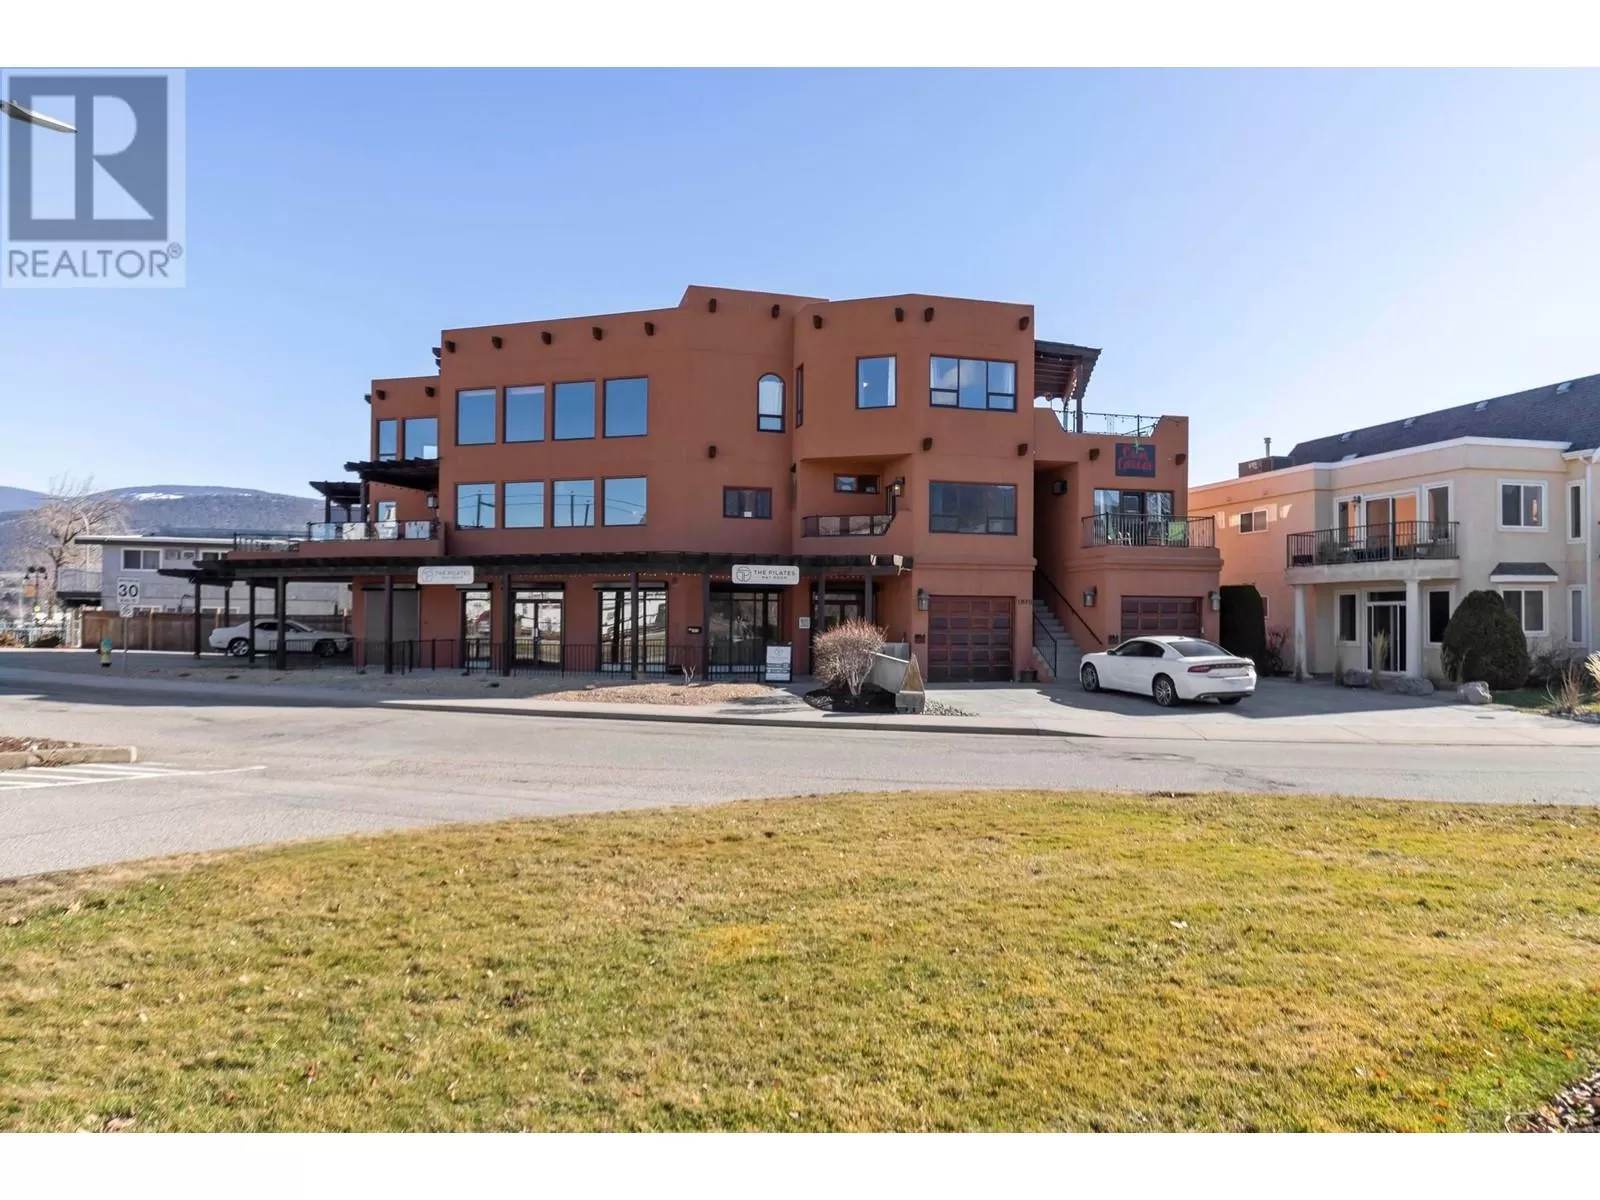 Residential Commercial Mix for rent: 1070 Lakeshore Drive W Unit# 201 & 202, Penticton, British Columbia V2A 1C1